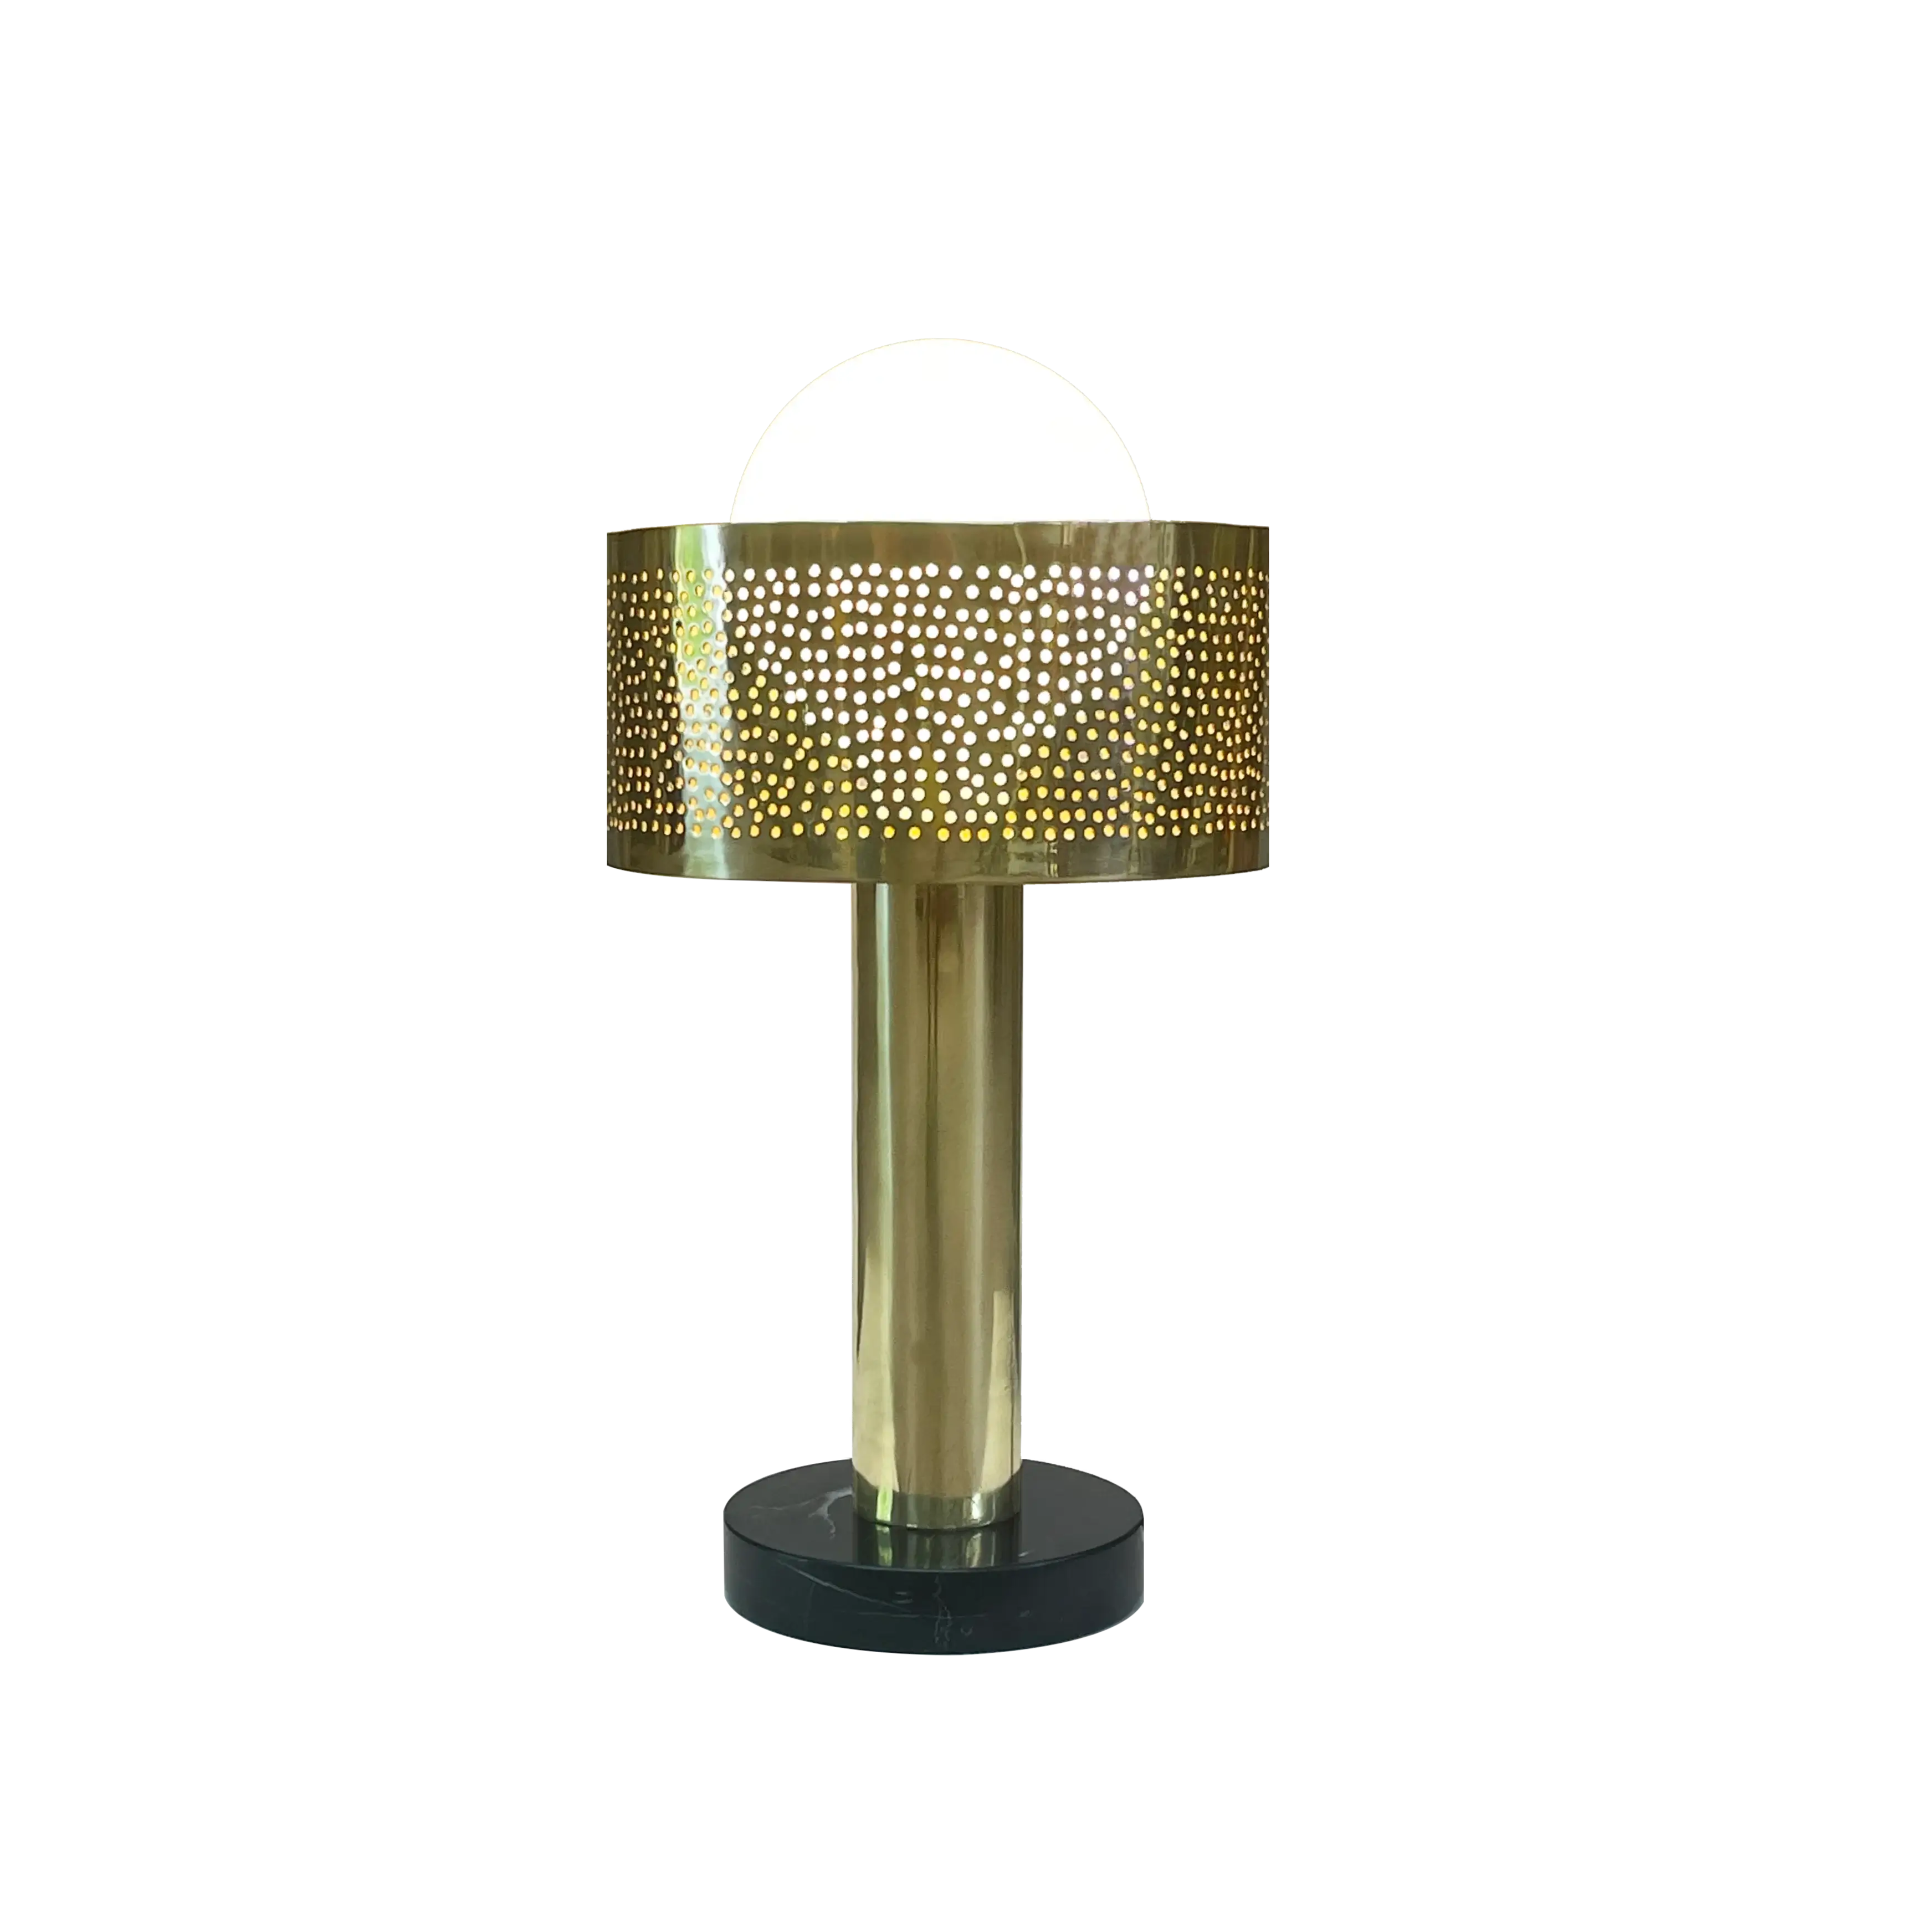 Dounia home Table lamp in poished brass made of Metal, Model: Alula